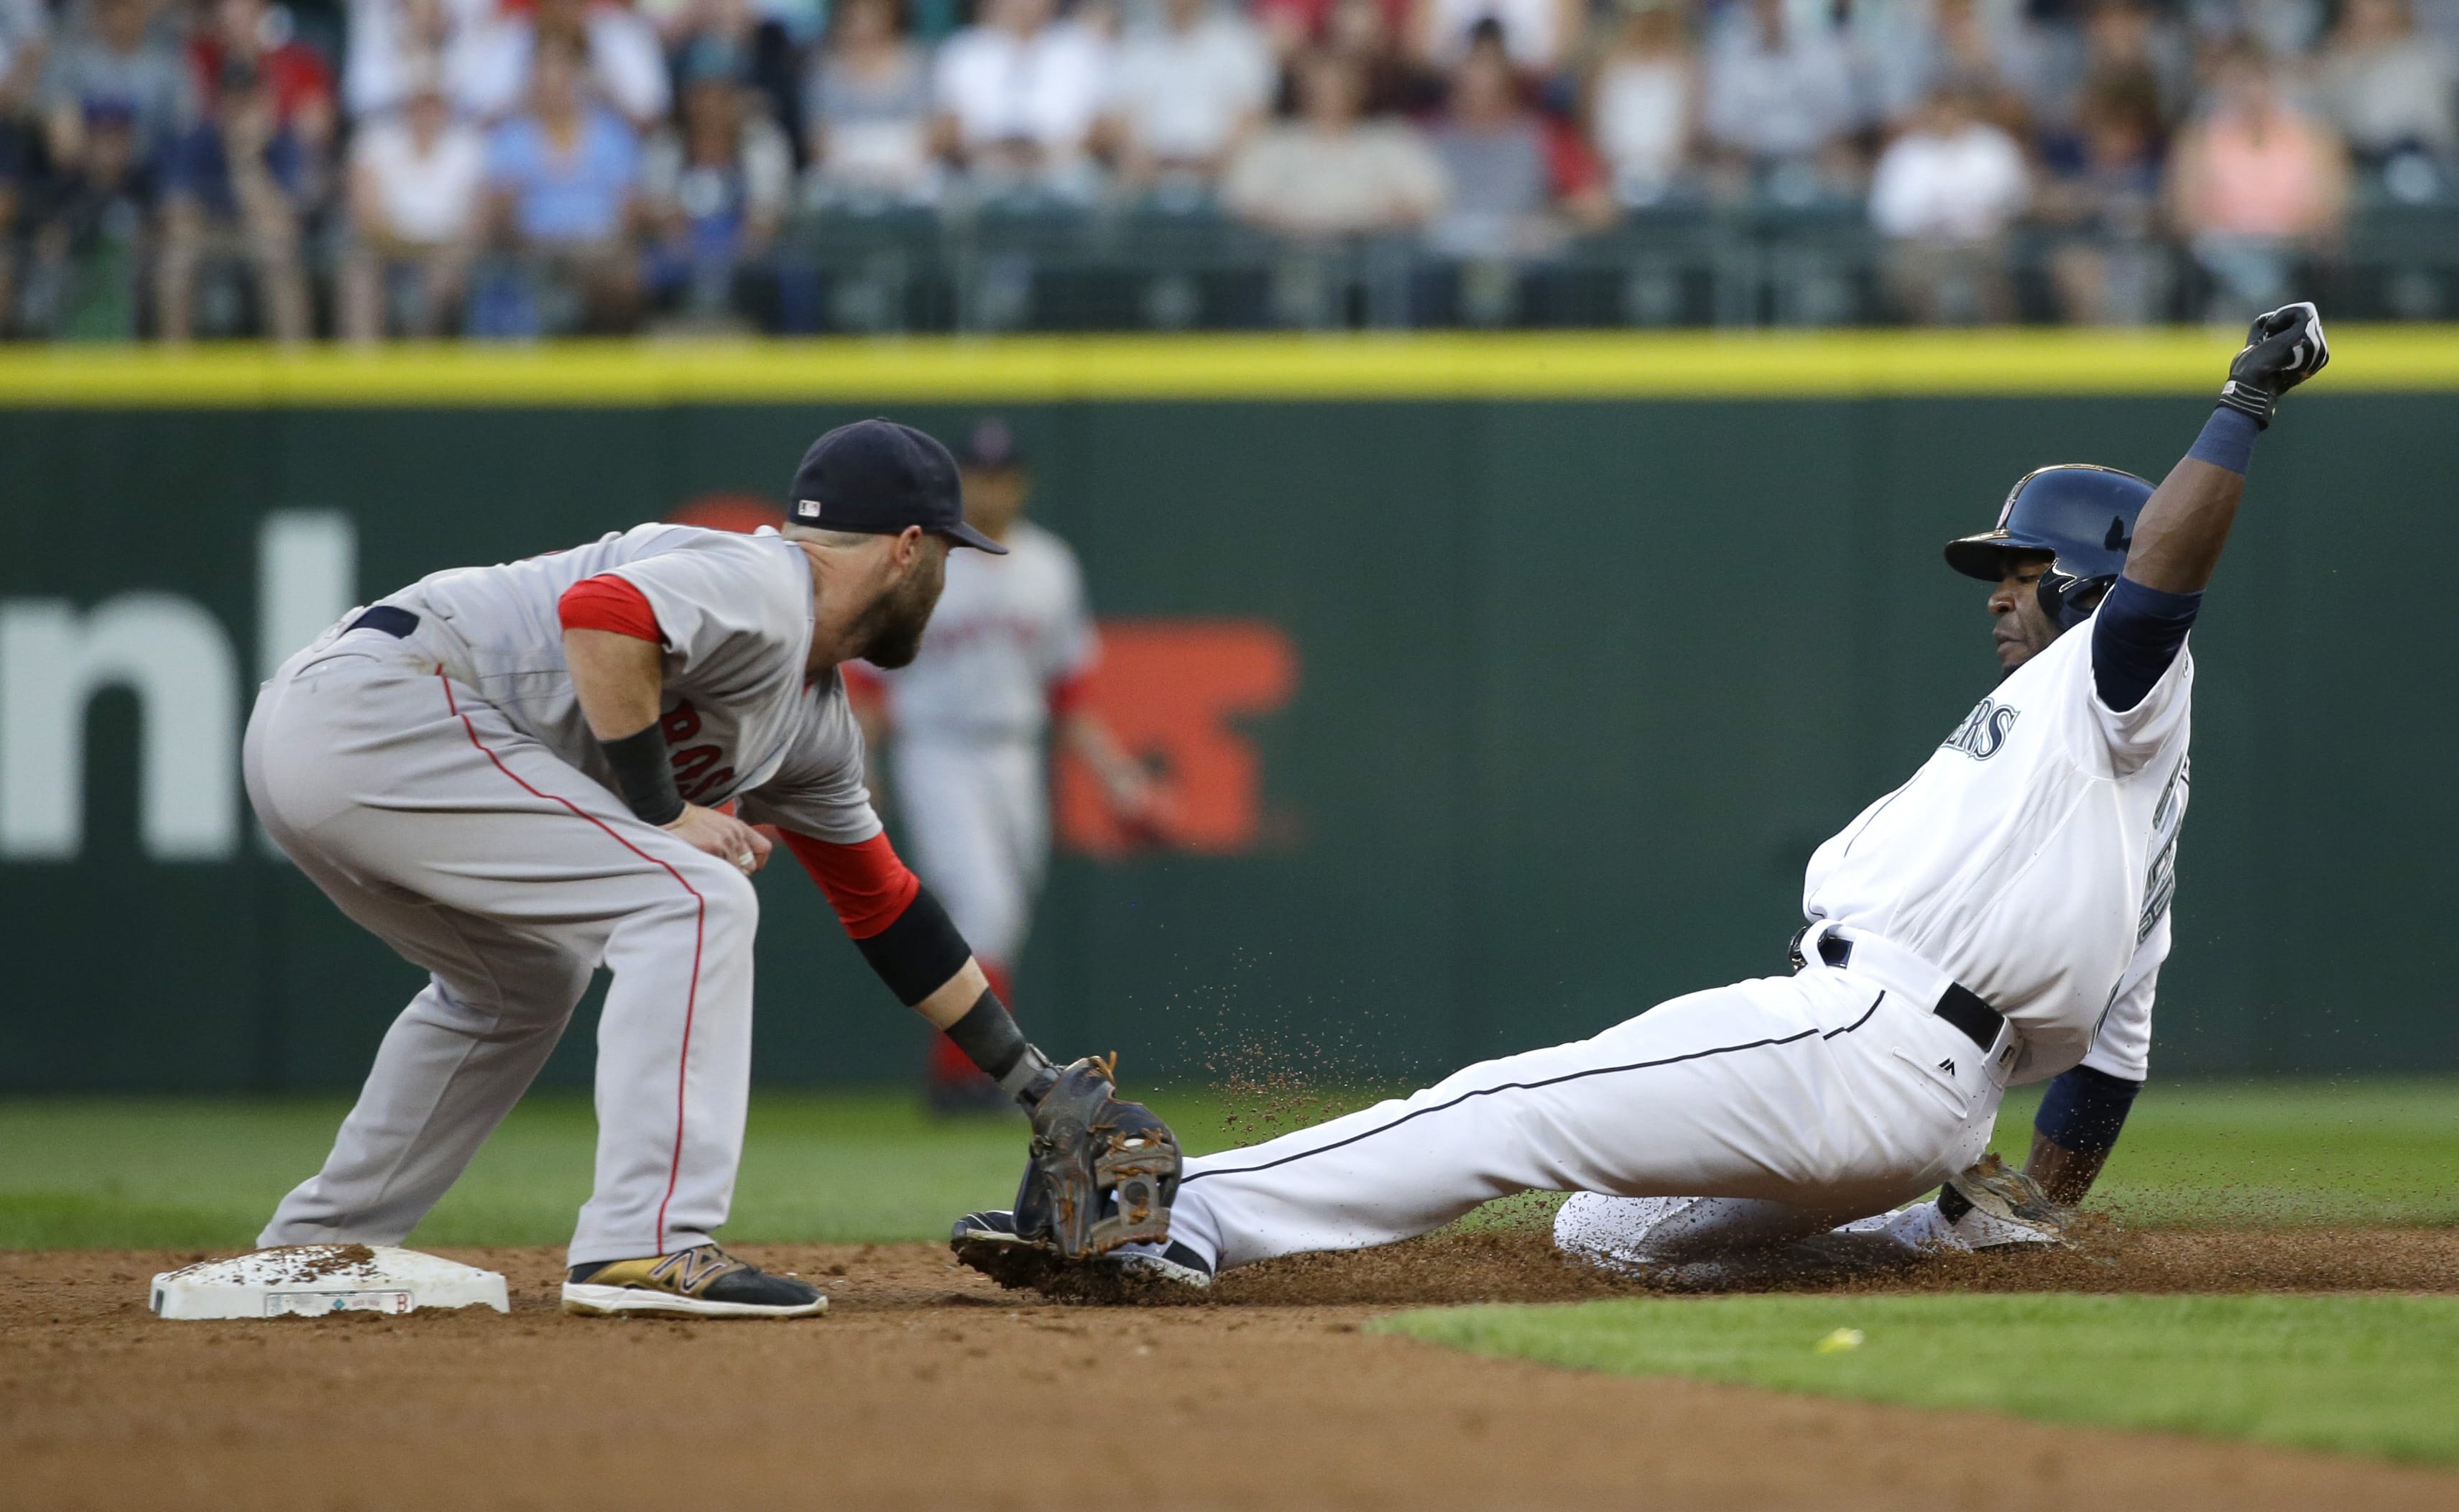 Seattle Mariners' Guillermo Heredia, right, is tagged out by Boston Red Sox second baseman Dustin Pedroia as Heredia tried to steal during the third inning of a baseball game, Thursday, Aug. 4, 2016, in Seattle. (AP Photo/Ted S.